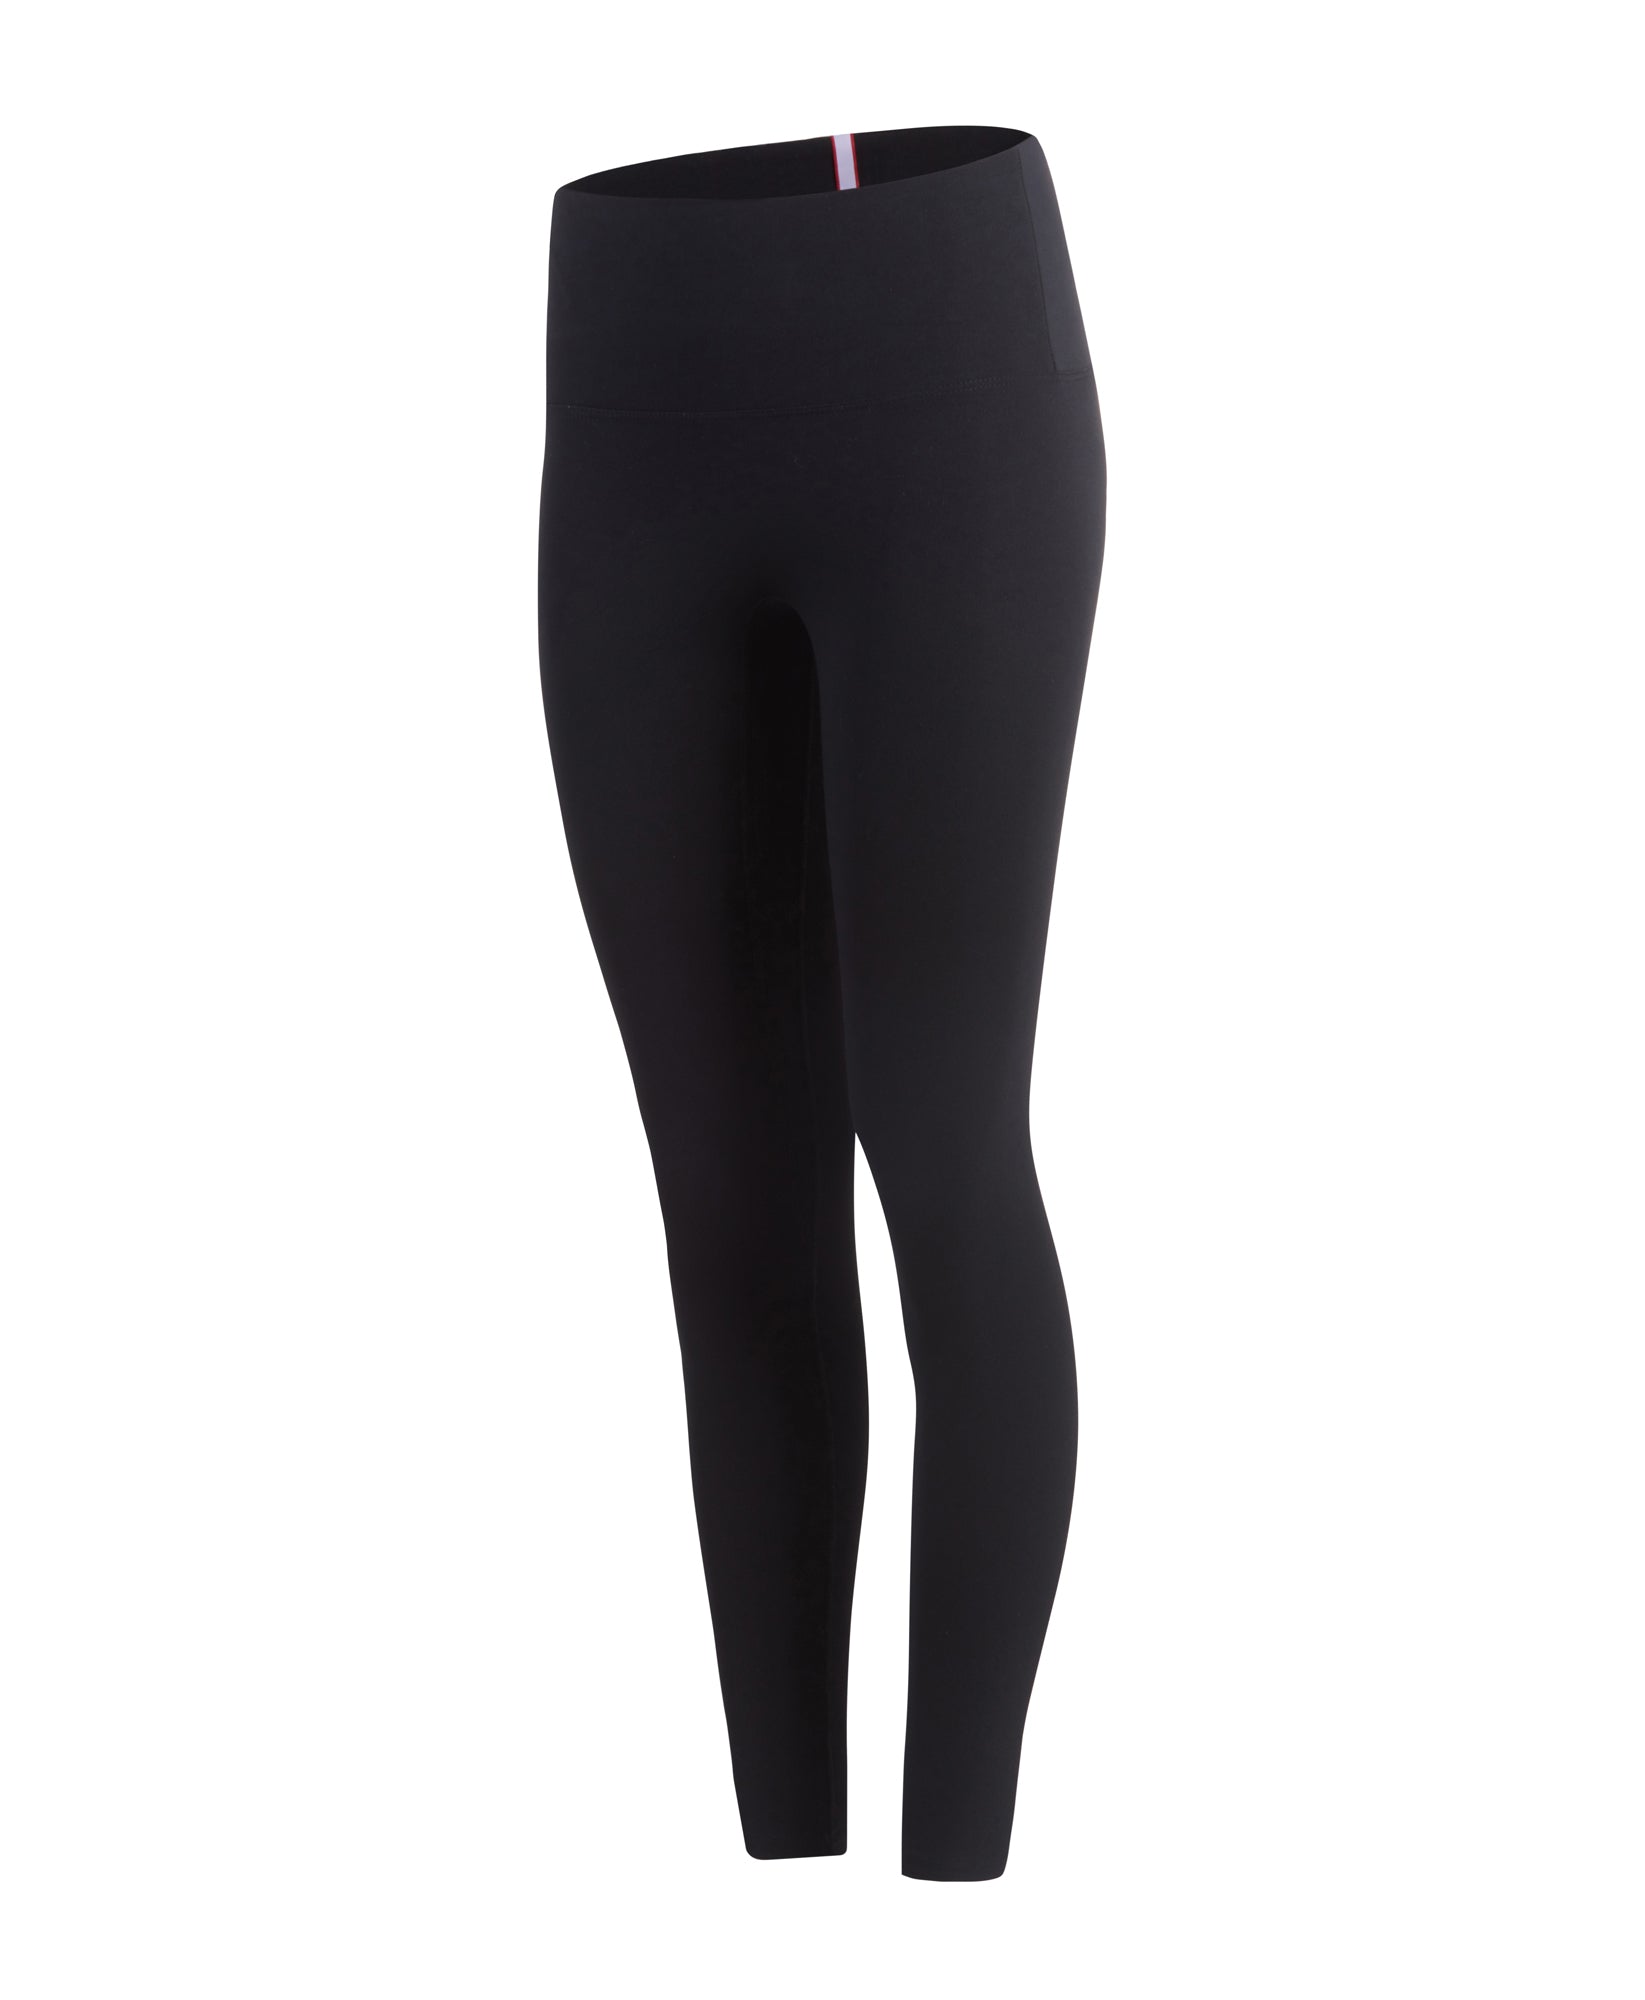 Wear One's At Routine Legging in Bean on Ghost Mannequin Side